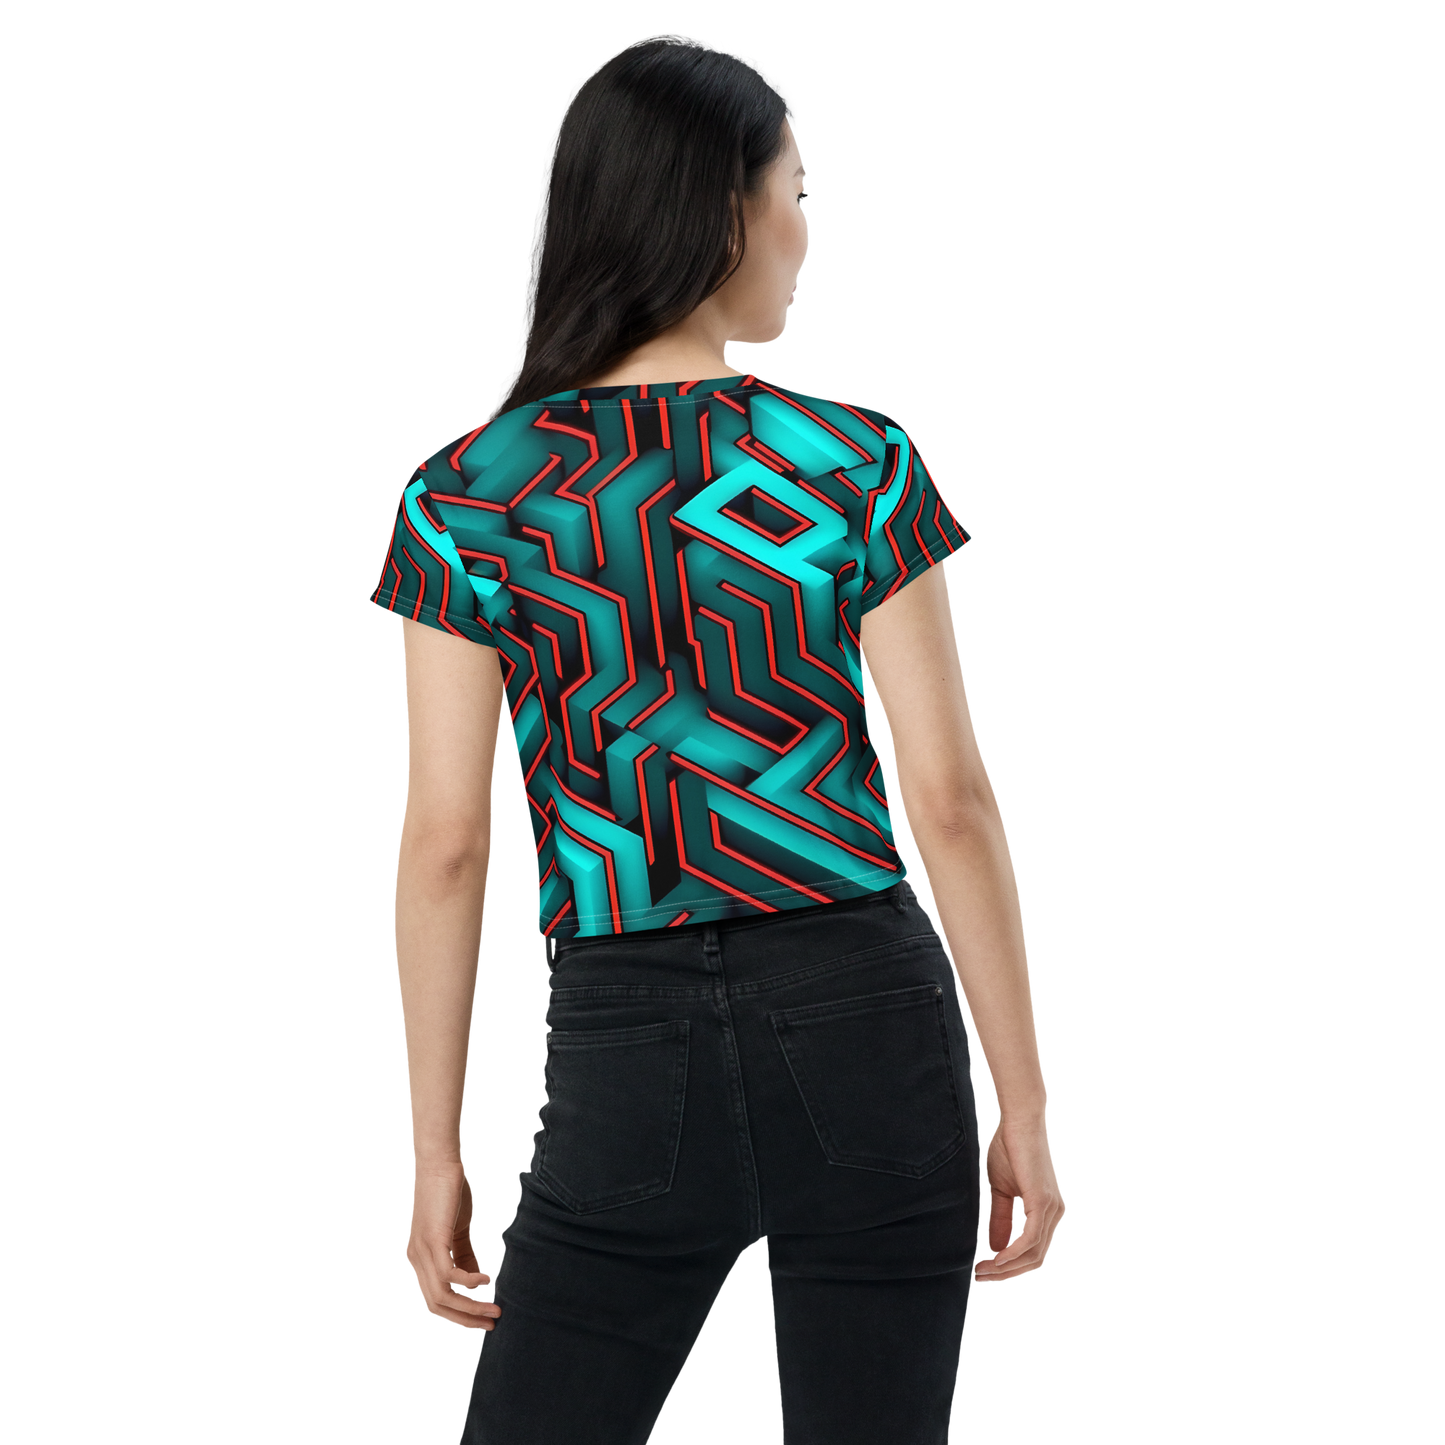 3D Maze Illusion | 3D Patterns | All-Over Print Crop Tee - #2